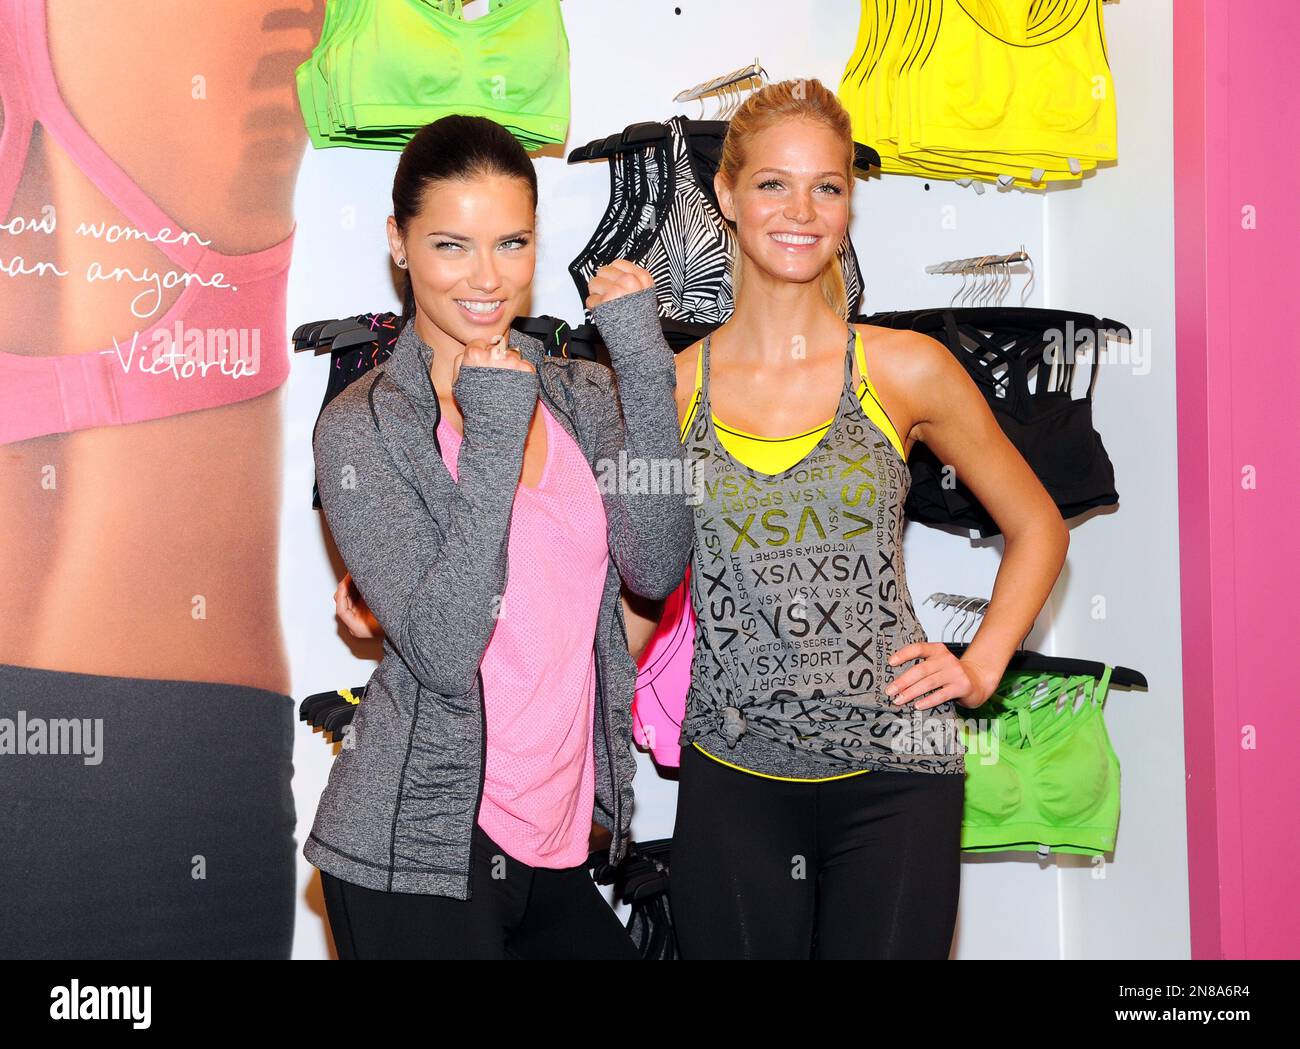 Models Adriana Lima, left, and Erin Heatherton pose together at a Victoria's  Secret VSX Sport Collection launch event at the Victoria's Secret Herald  Square store on Tuesday, Jan. 15, 2013 in New